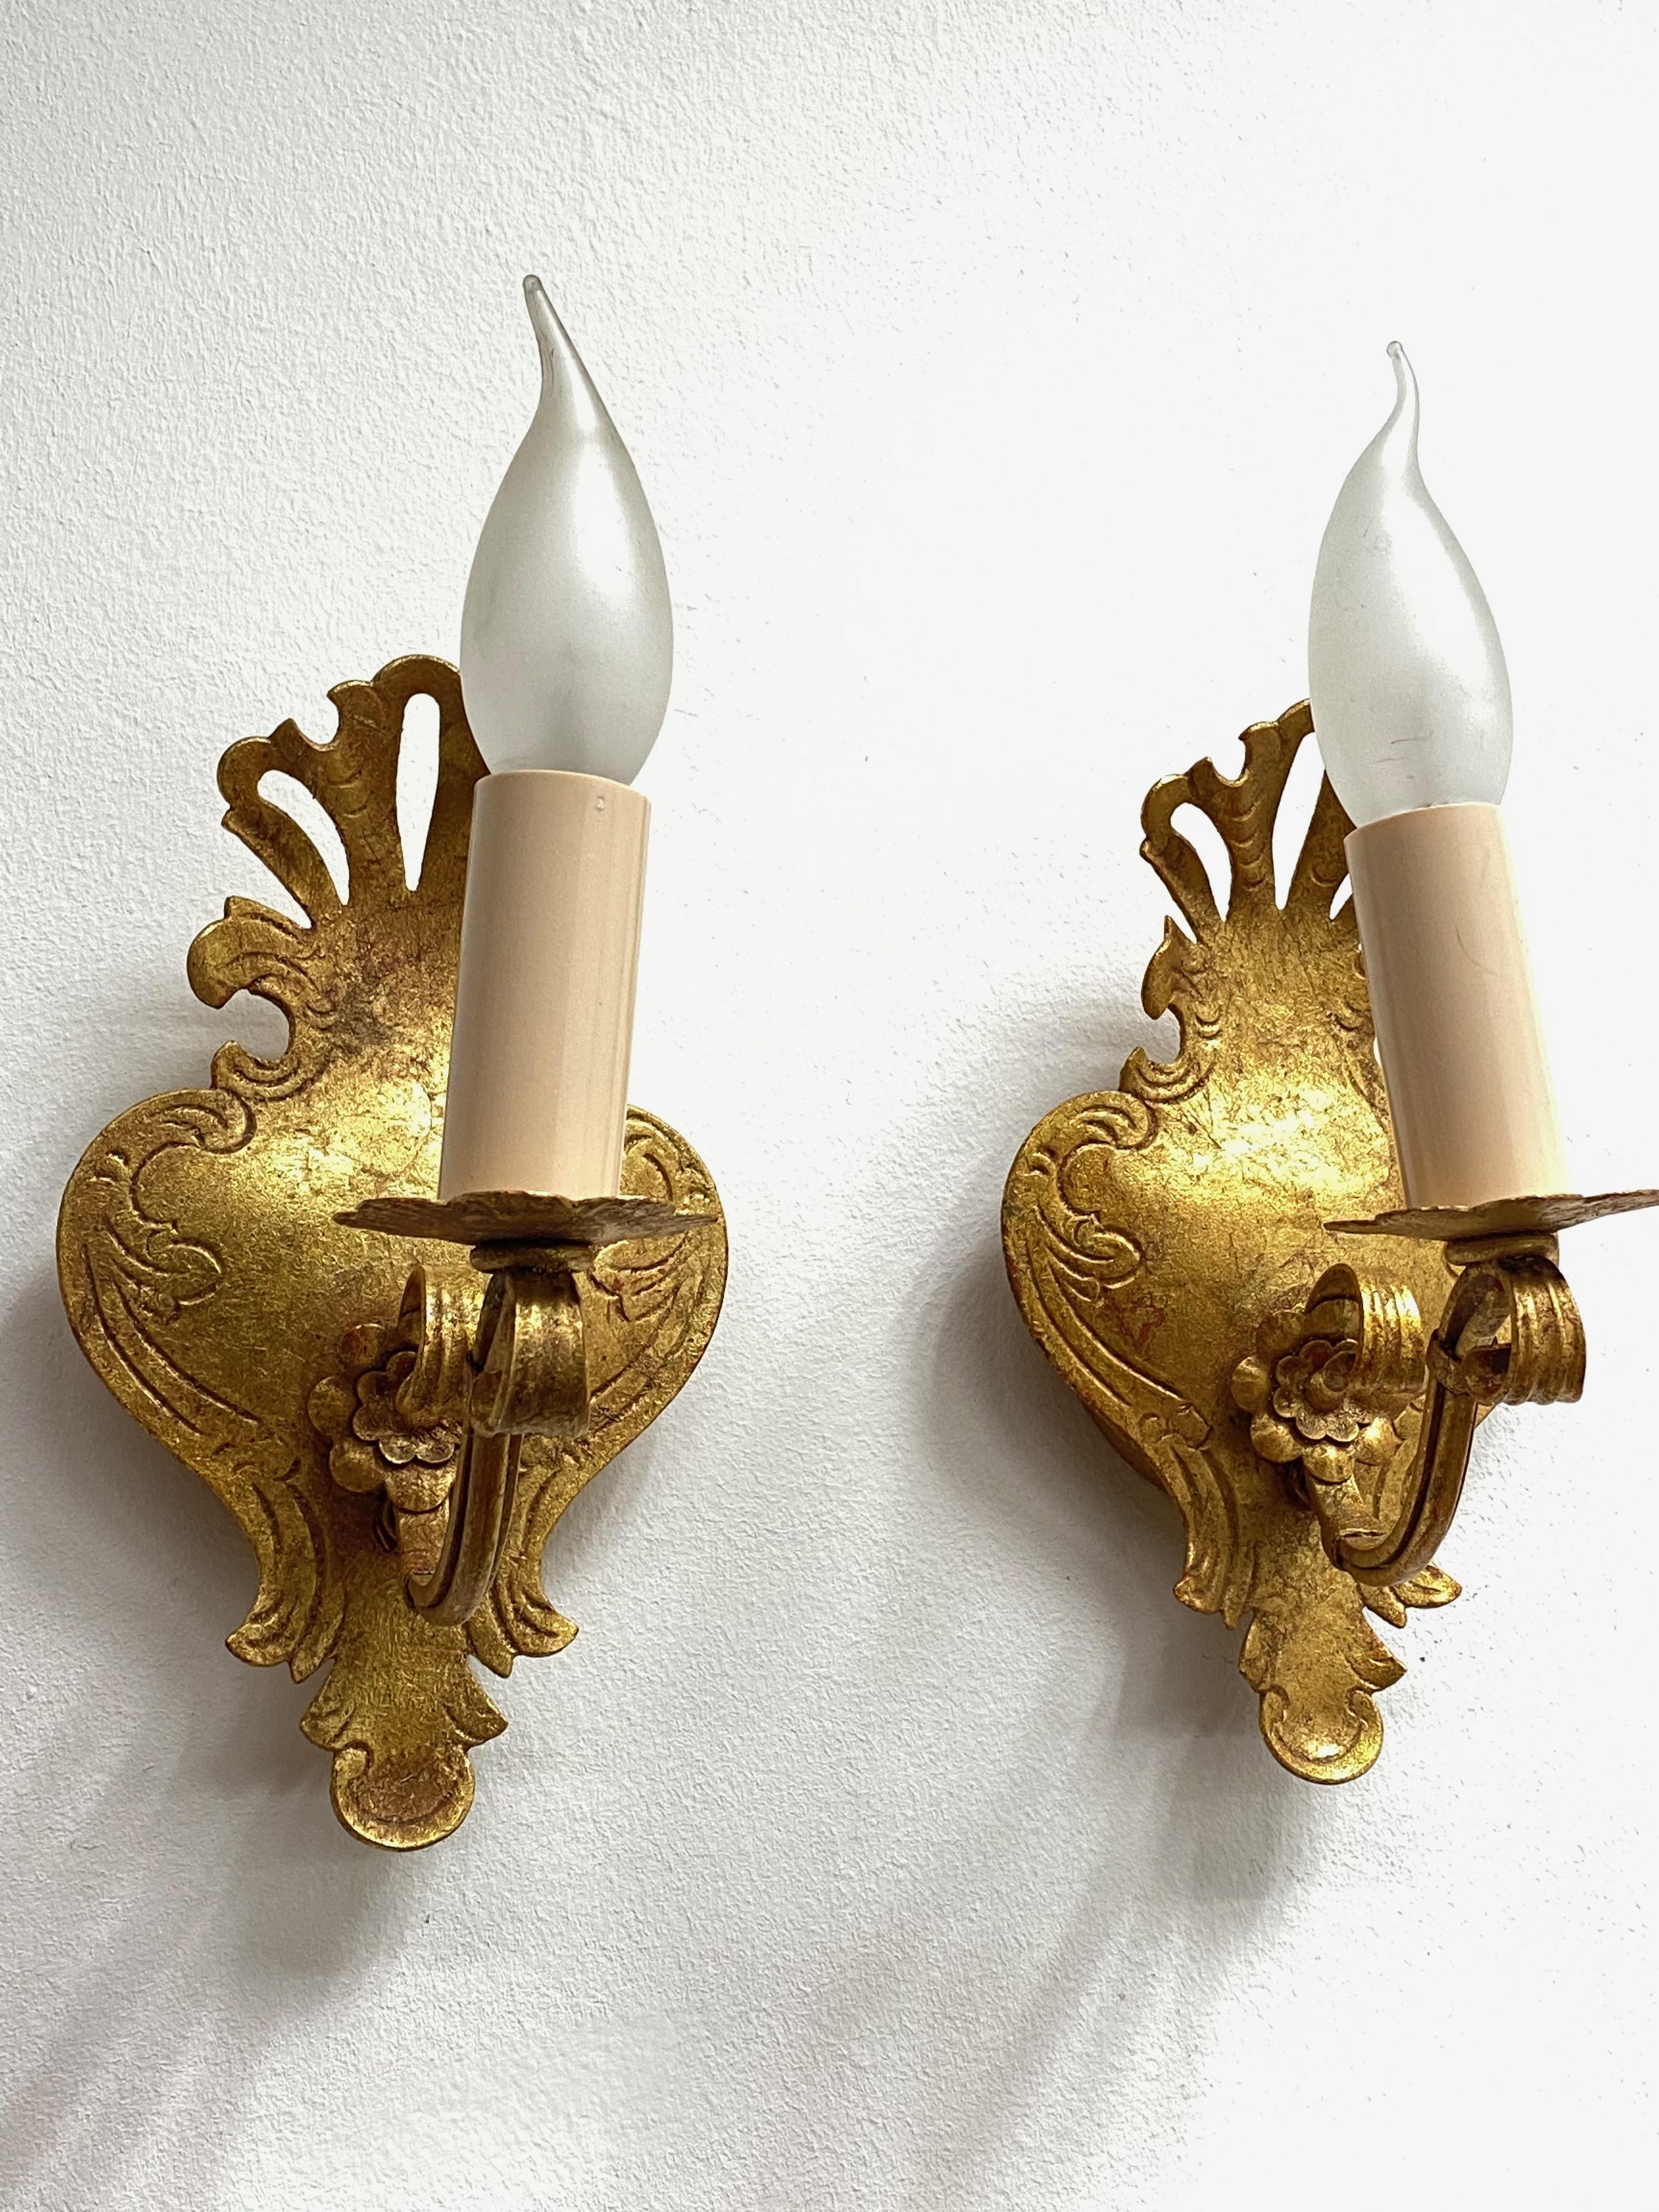 A pair Hollywood Regency midcentury gilt tole sconces, each fixture requires one European E14 candelabra bulb, up to 60 watts. The wall lights have a beautiful patina and give each room a eclectic statement. Made by Reindl Leuchten, Germany. Bulbs